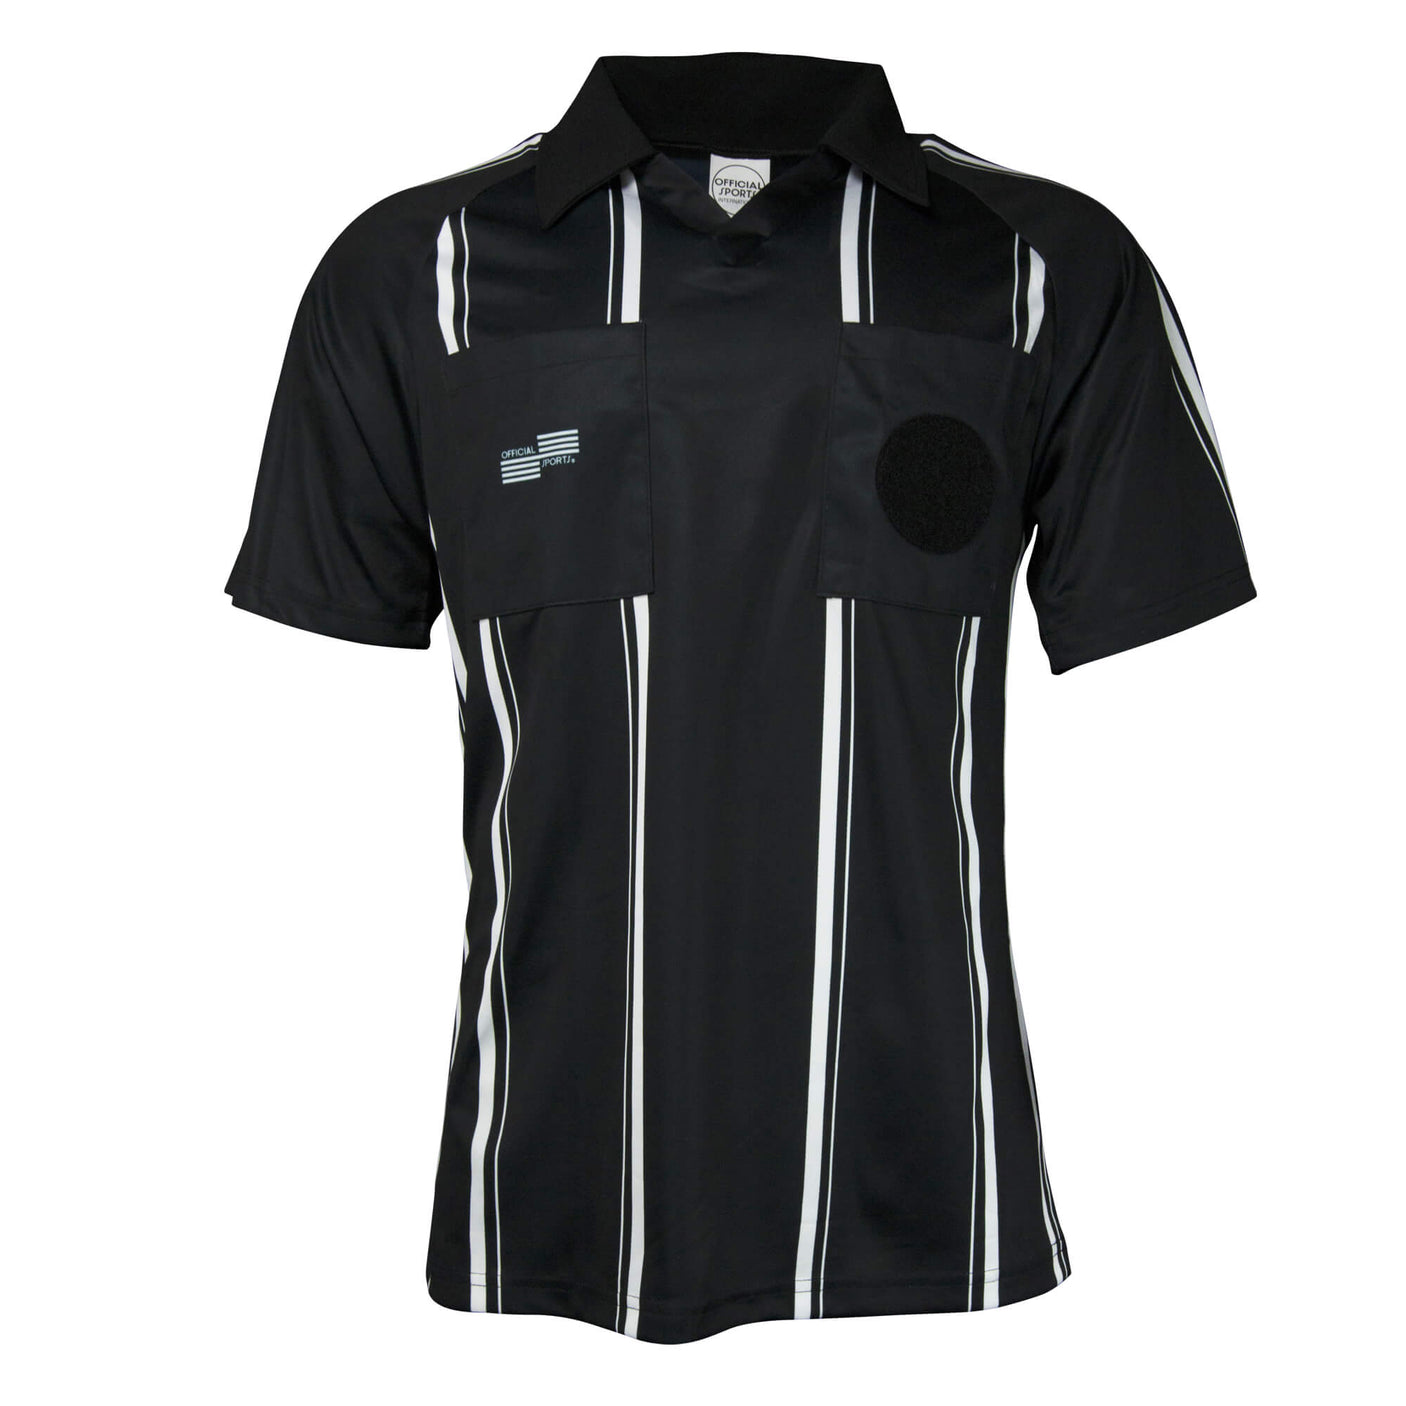 Official Sports Men's USSF Economy SS Shirt Black